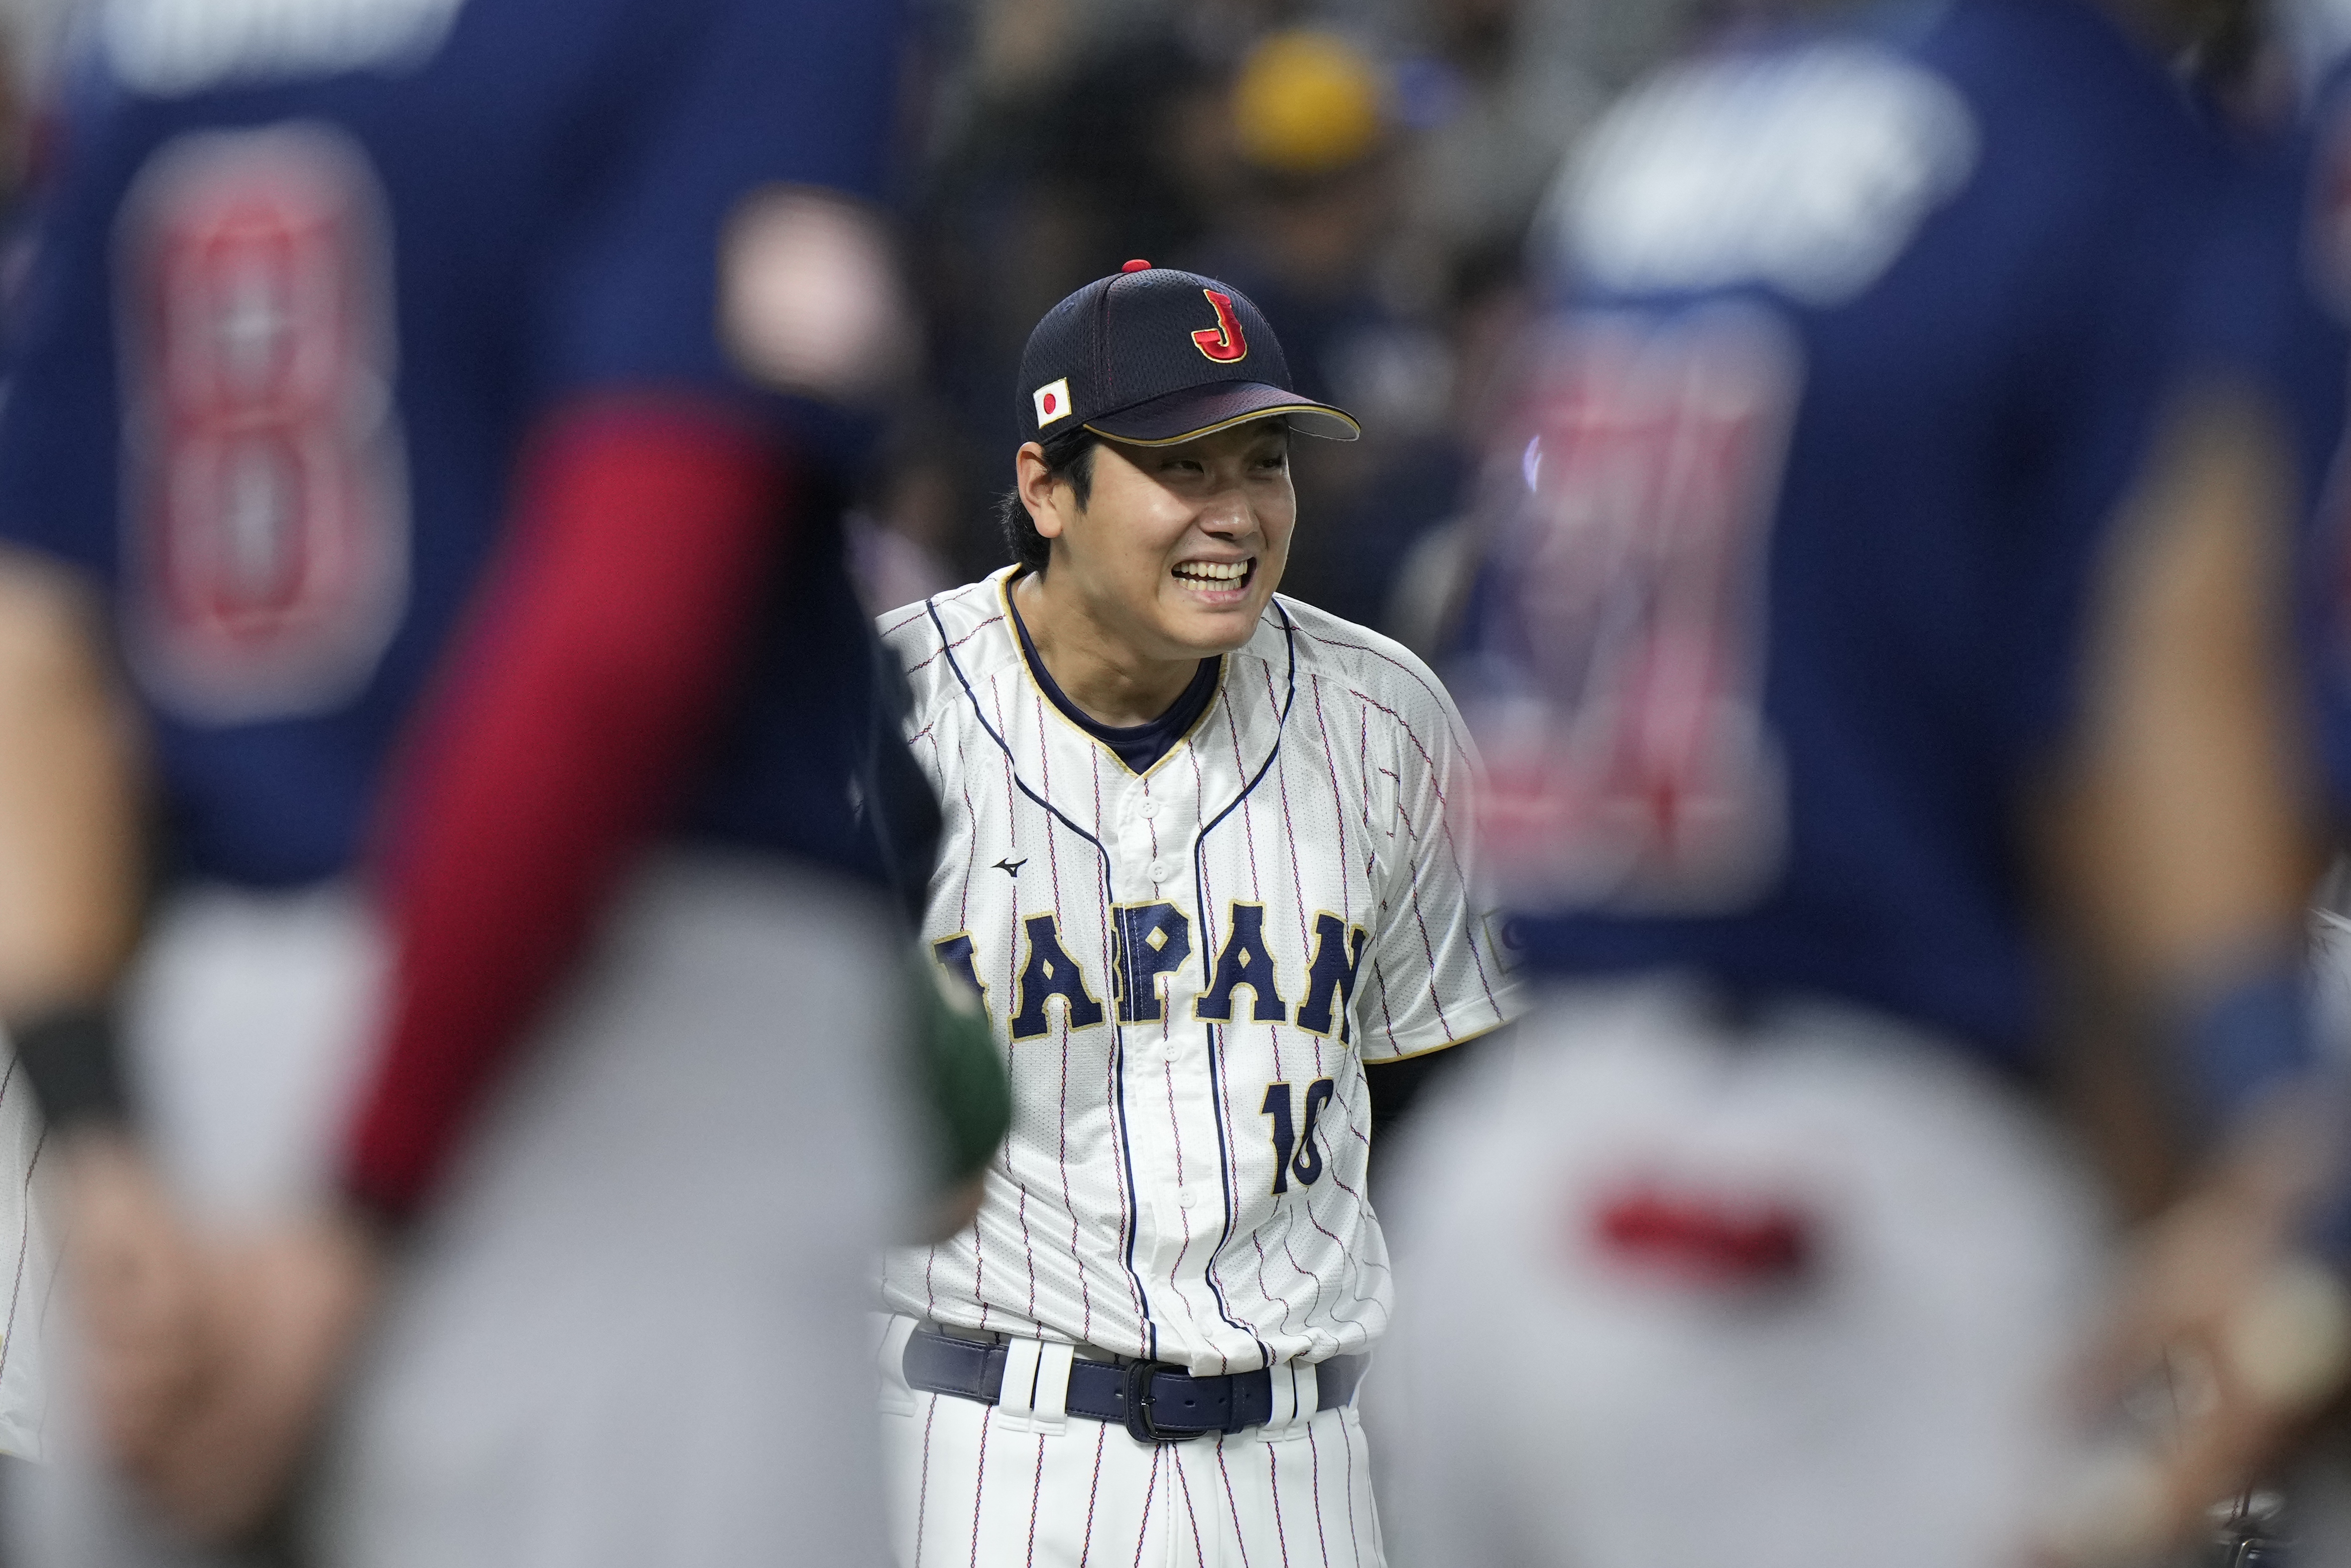 Japan's Shohei Ohtani (16) smiles as he introduces the players before the final against the United States in the World Baseball Classic, Tuesday, March 21, 2023, in Miami.  (AP Photo/Wilfredo Lee)